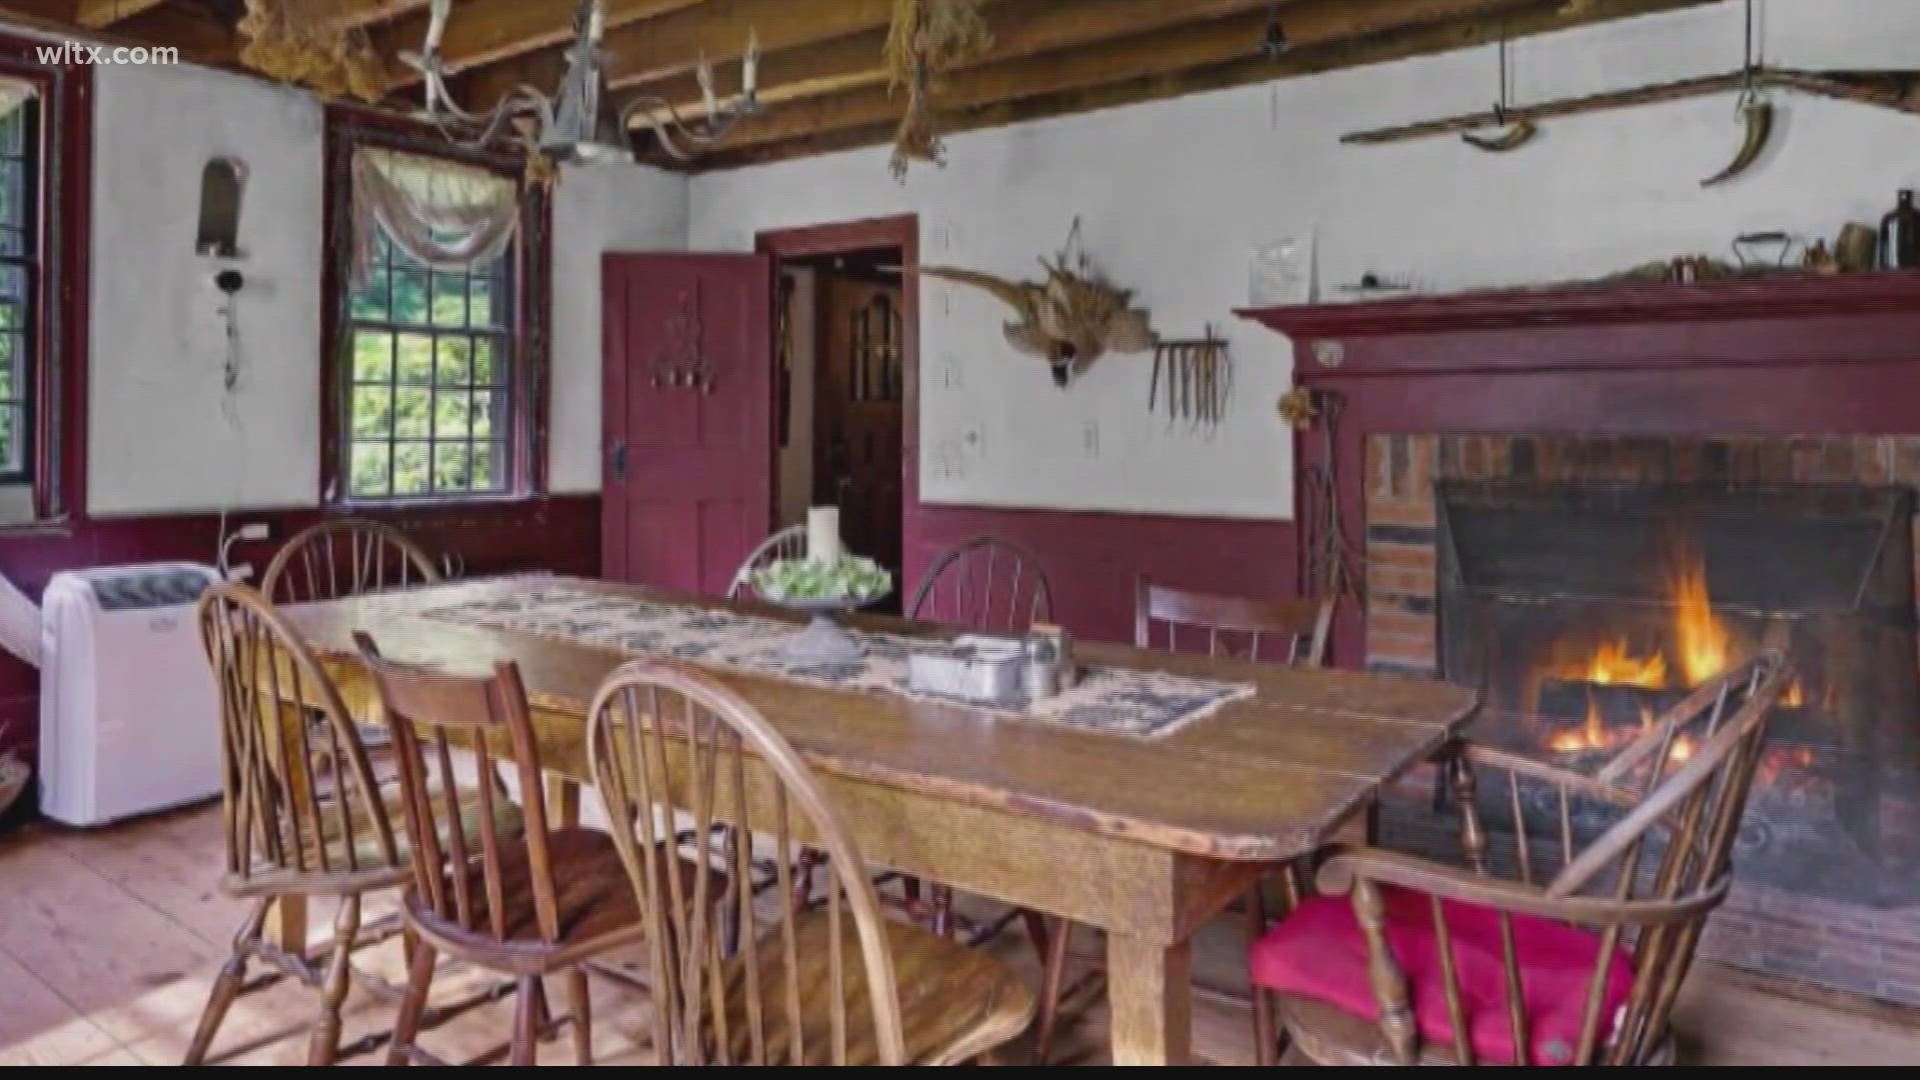 The Rhode Island farm house that inspired the 2013 horror movie "The Conjuring" is up for sale.